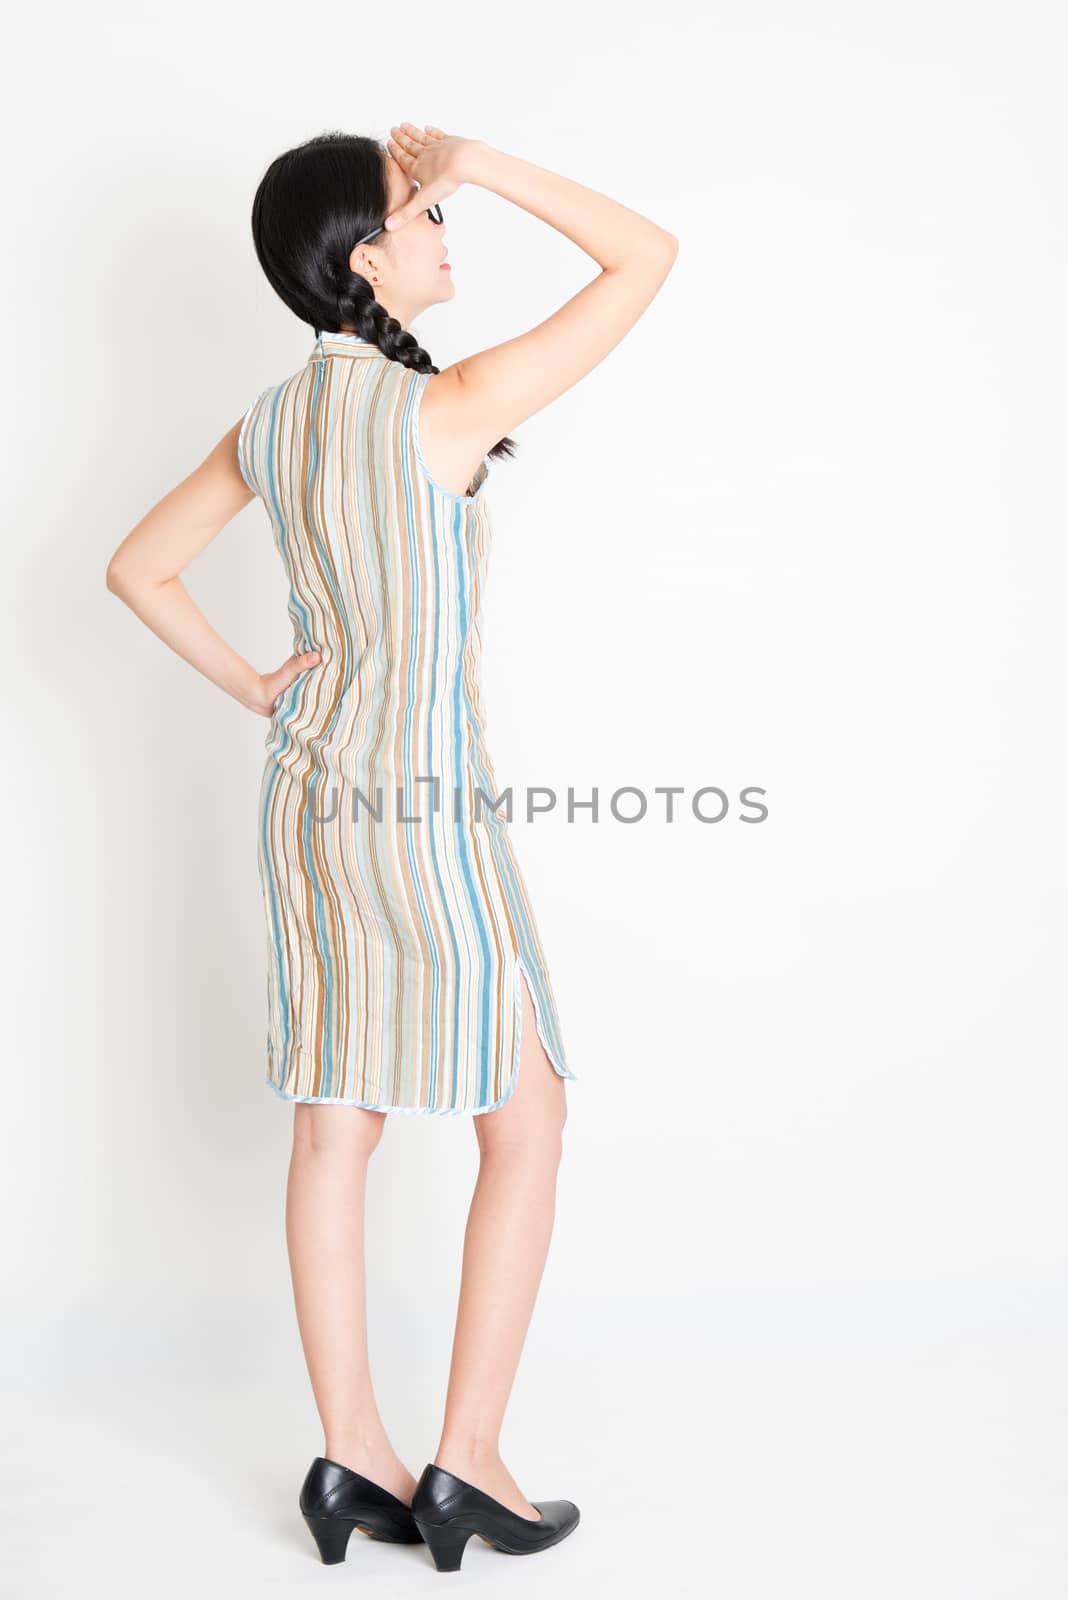 Rear view of young Asian woman in traditional qipao dress hand shielding, full length standing on plain background.